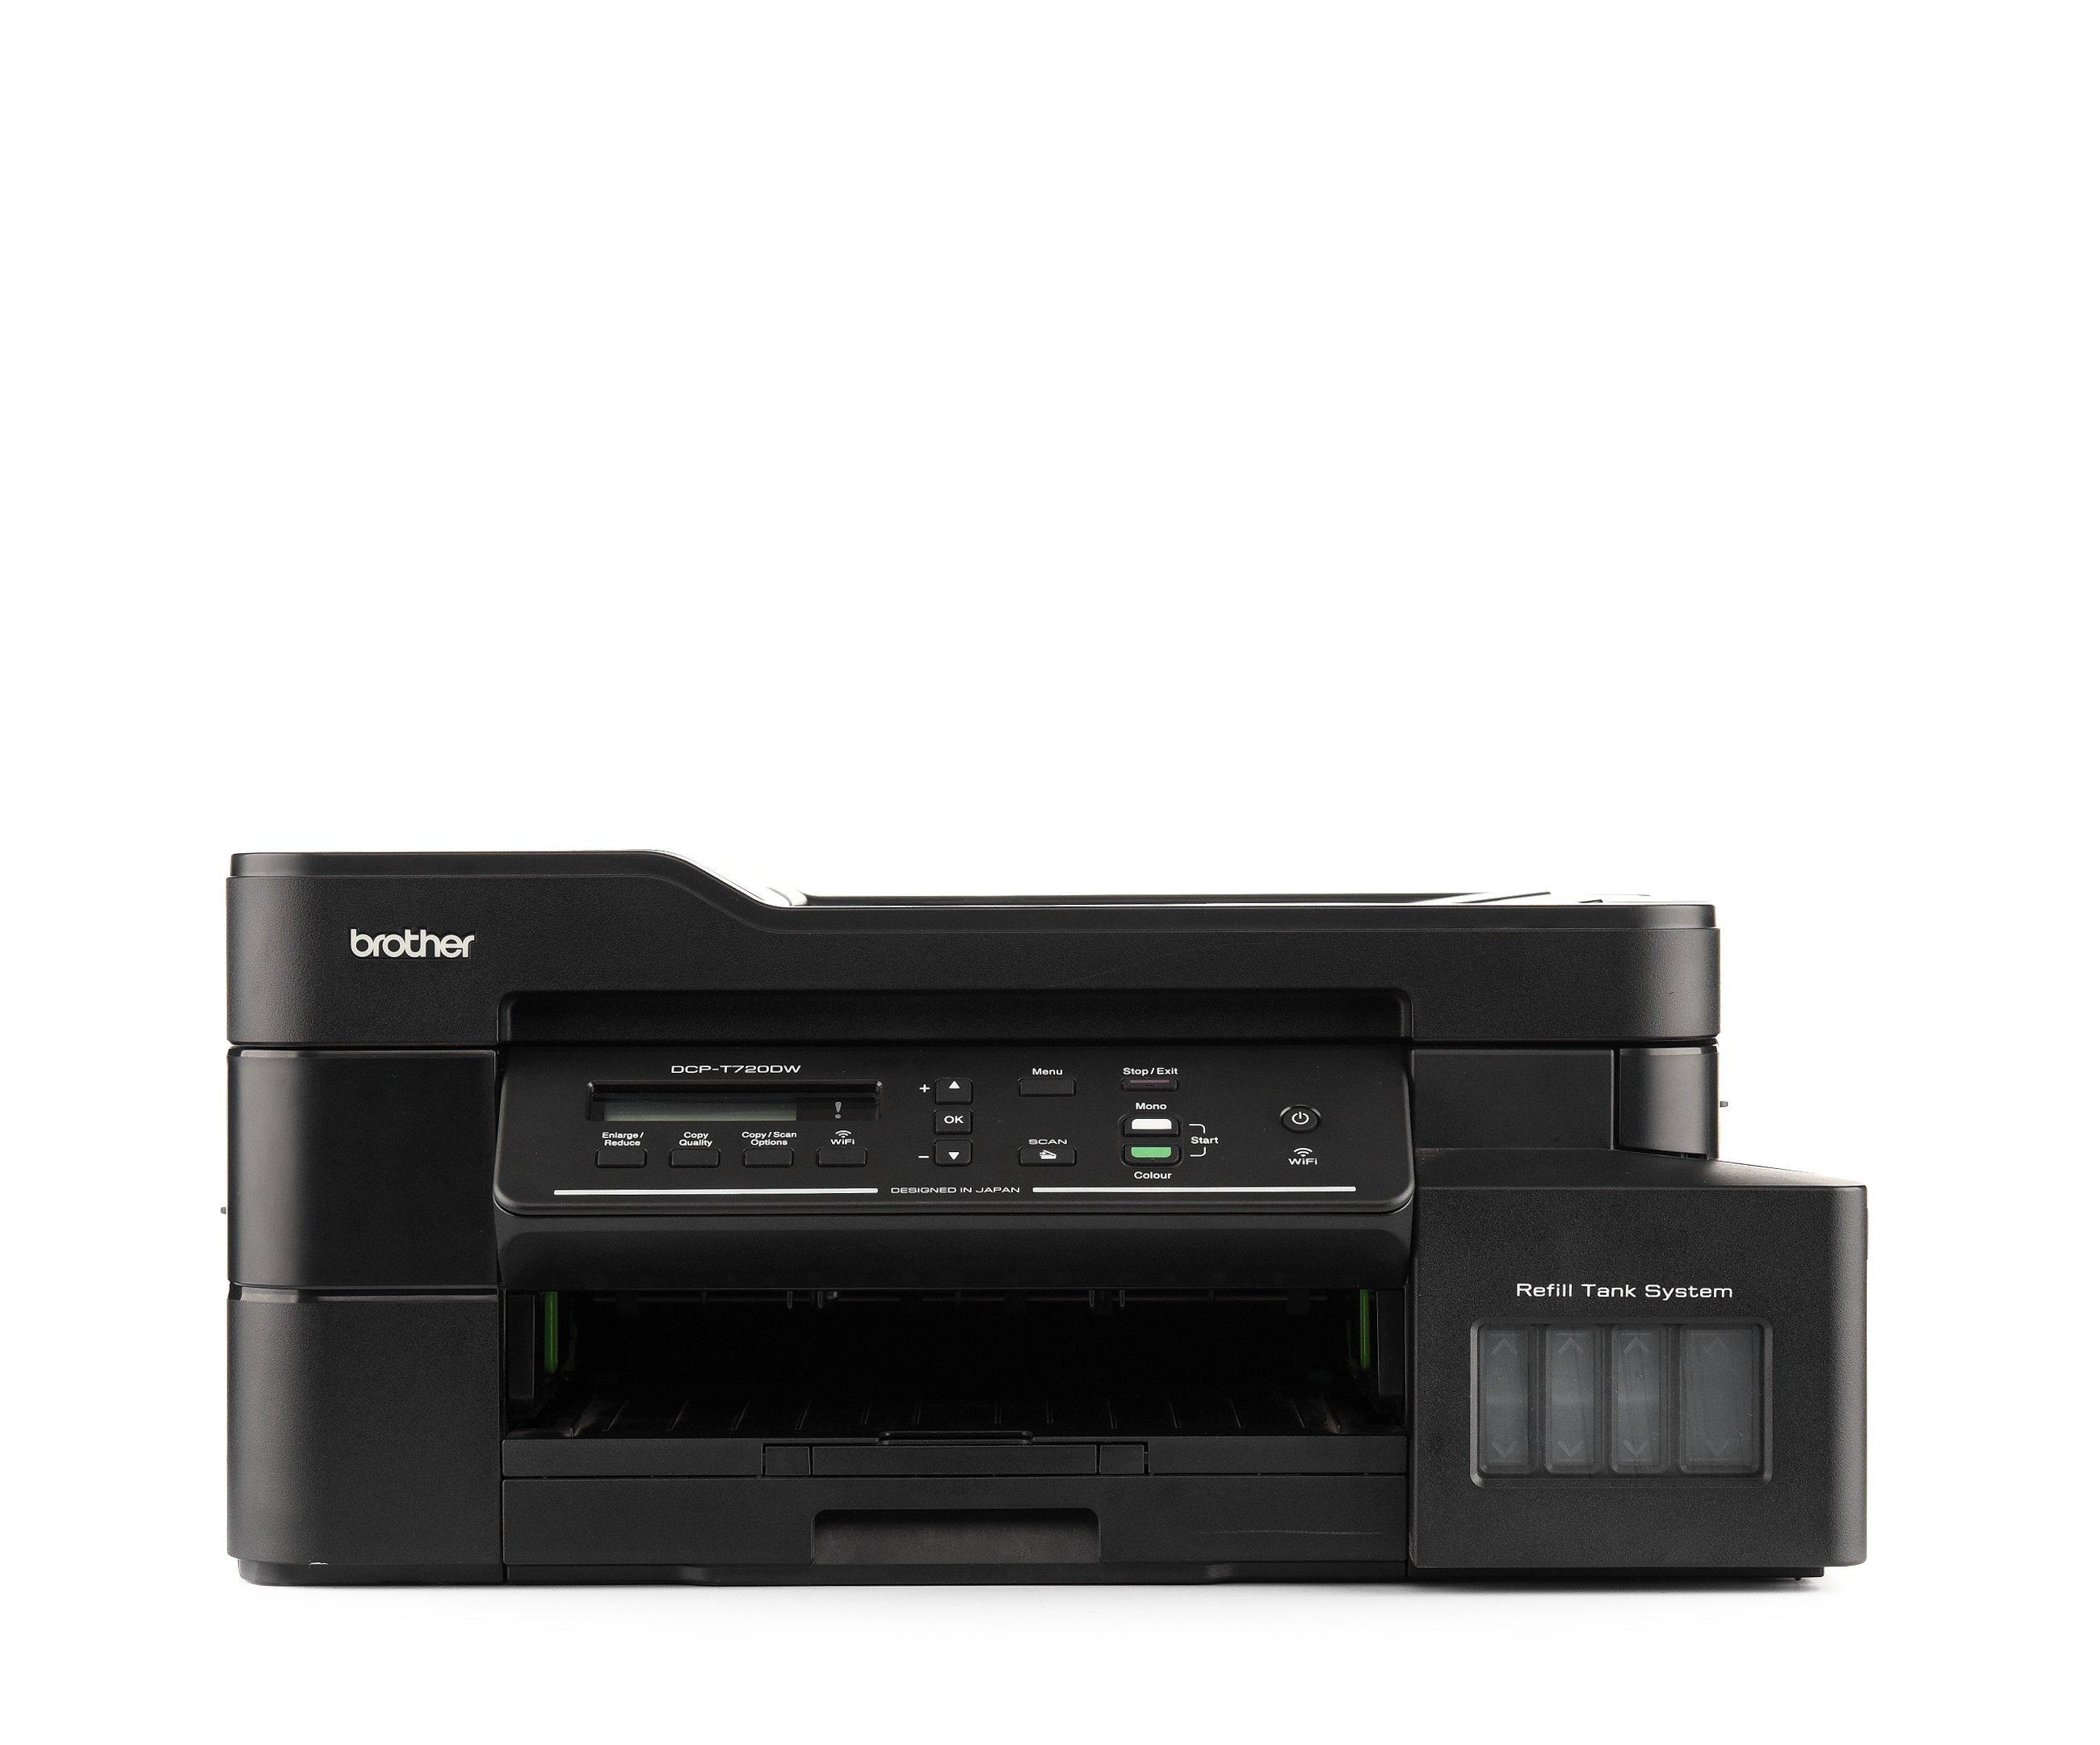 Brother Dcp T720dw 3 In 1 Wireless Colour Inkjet Printer With Refill Tank System Extra Saudi 6056